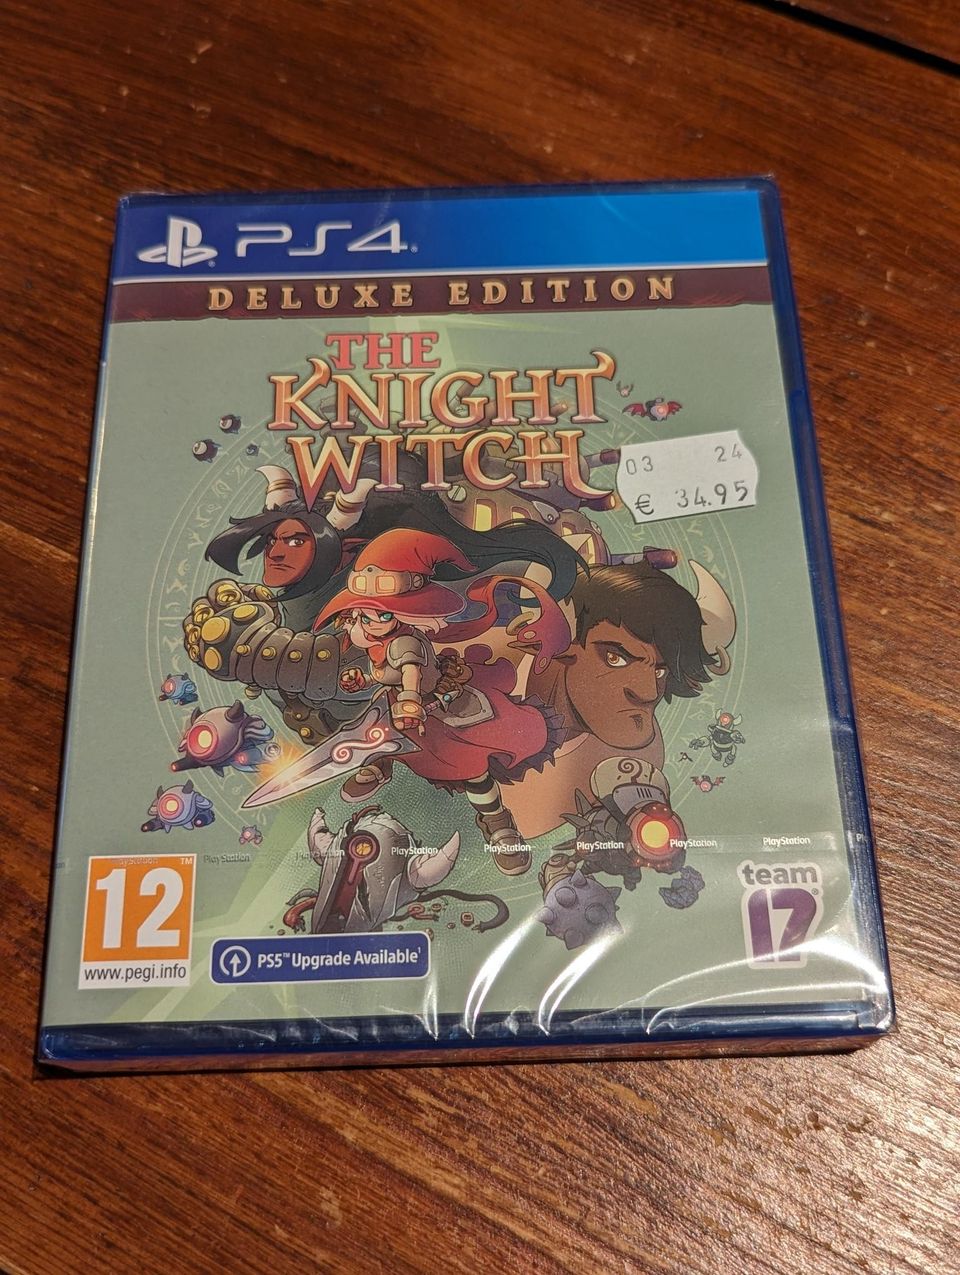 The Knight Witch Deluxe Edition
Videopeli PS4